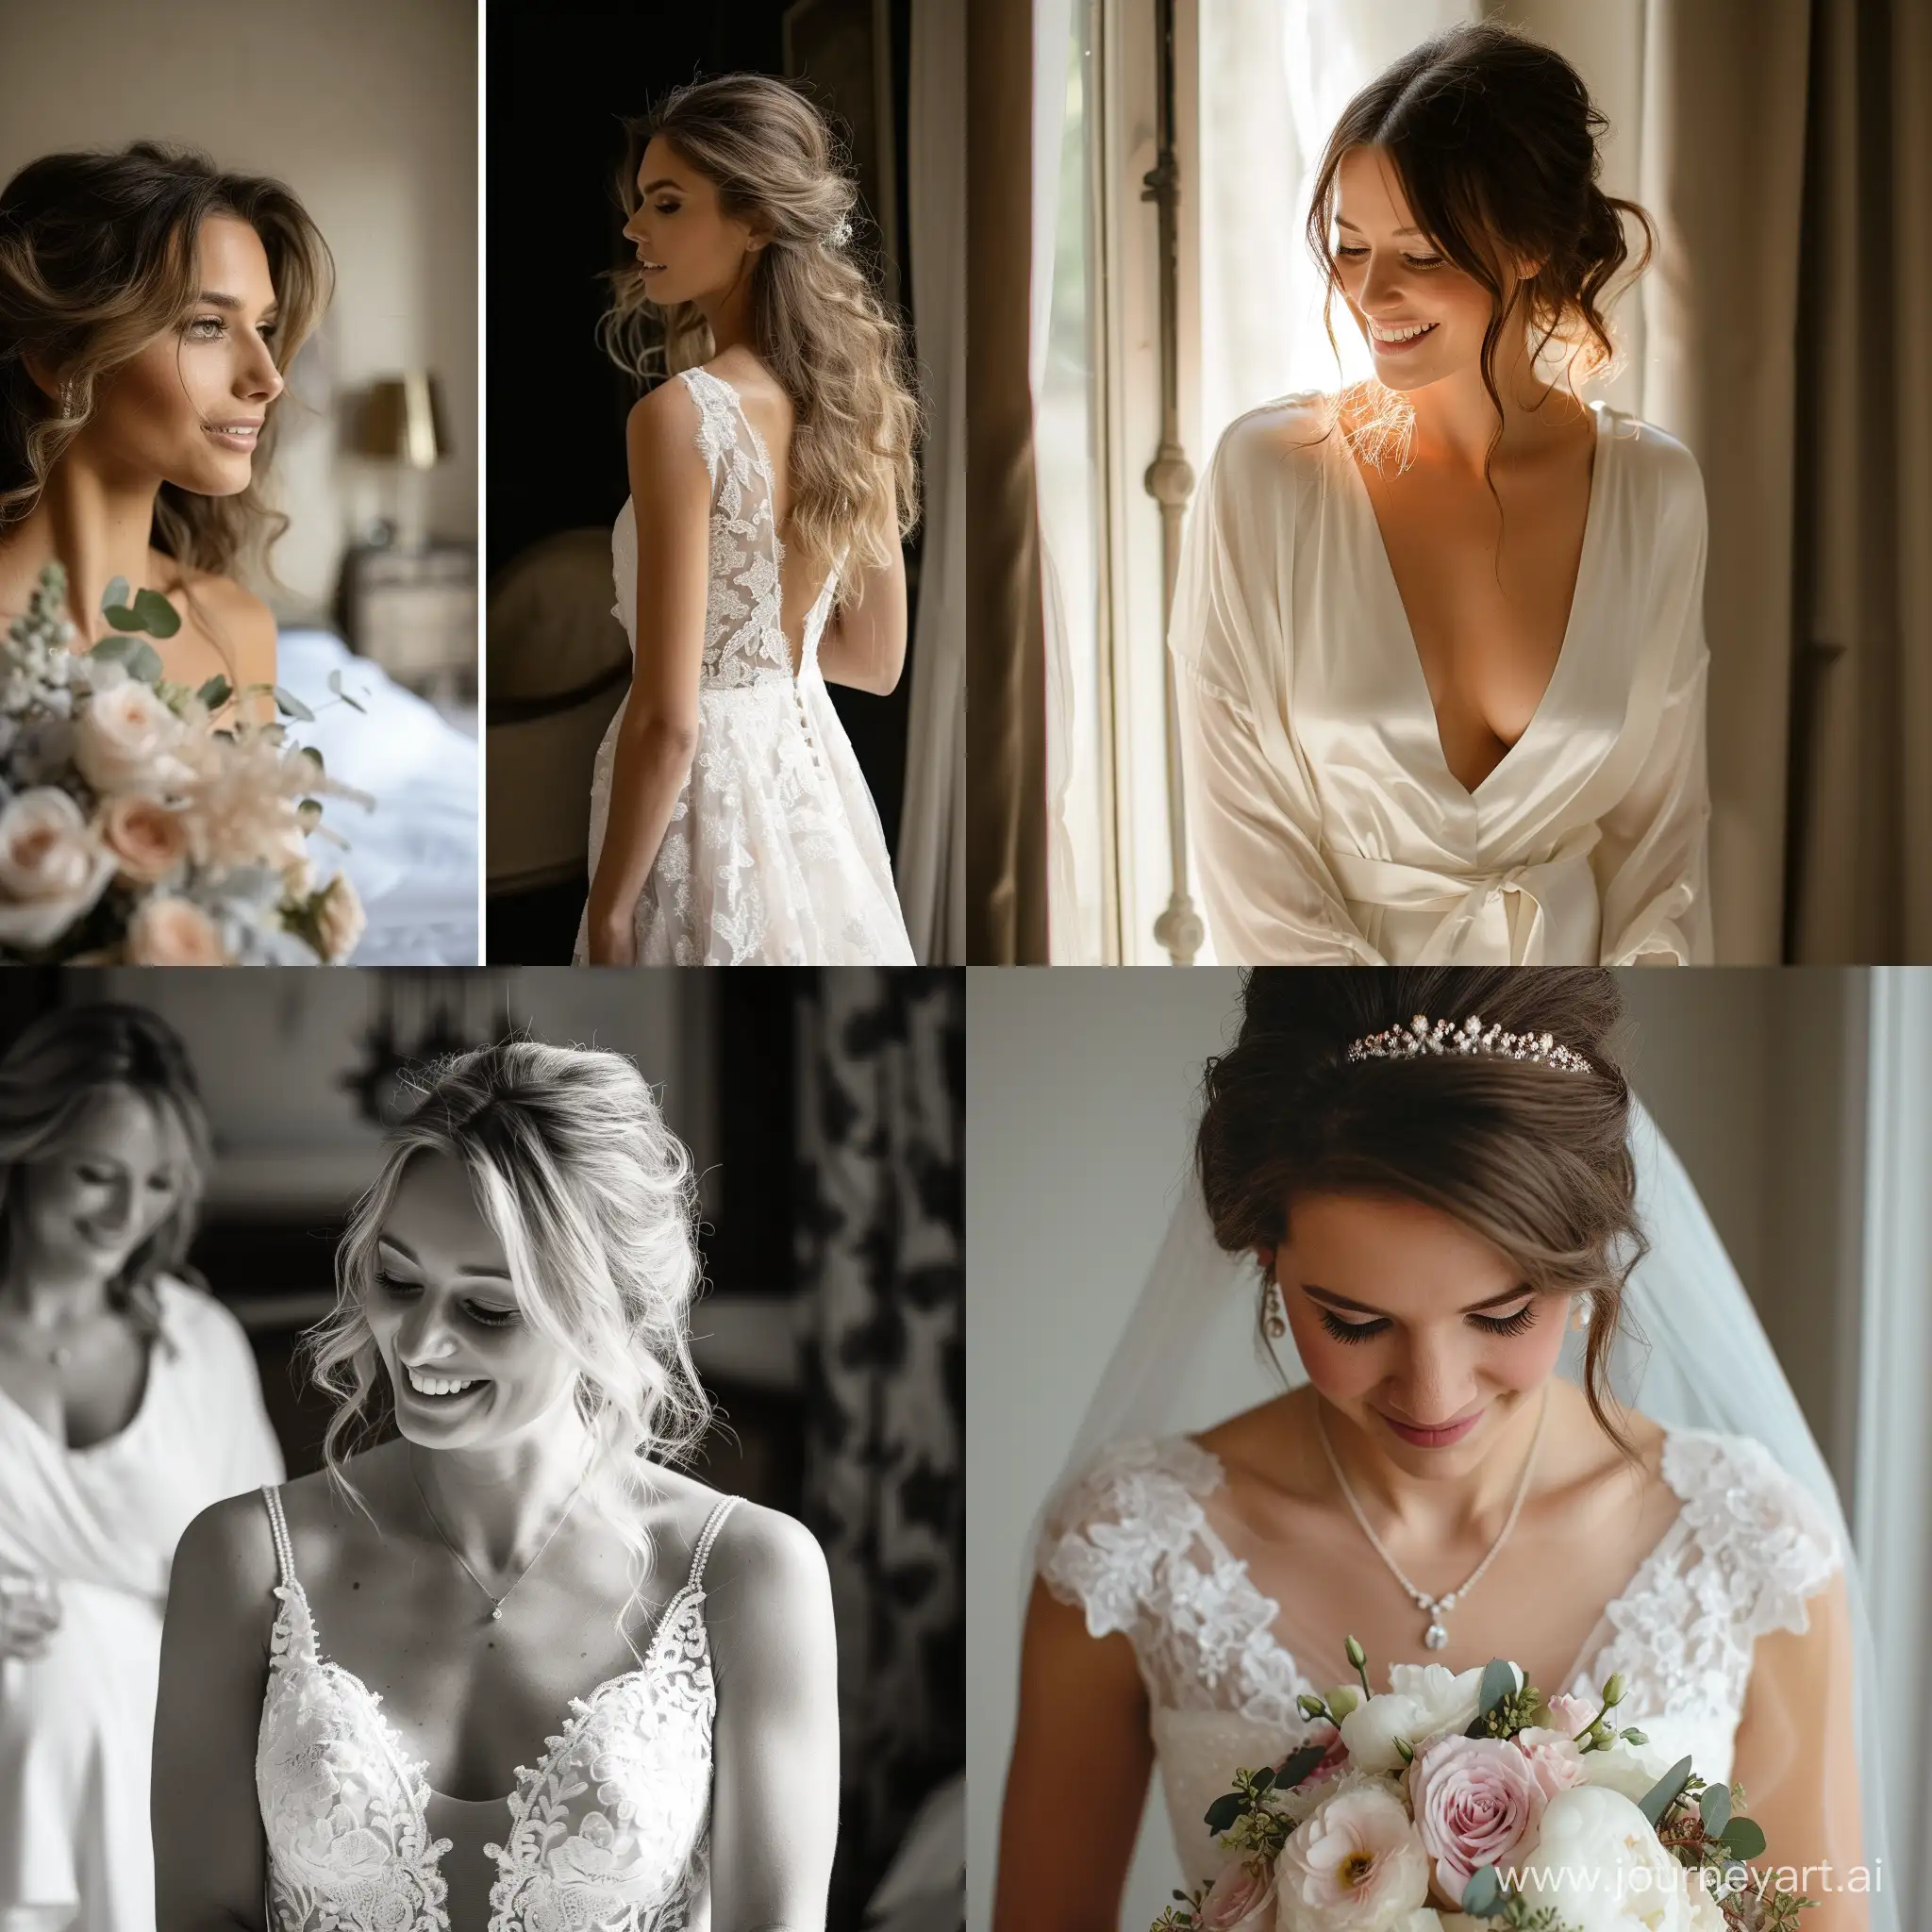 Bridal-Preparation-Serene-Moments-Before-the-Ceremony